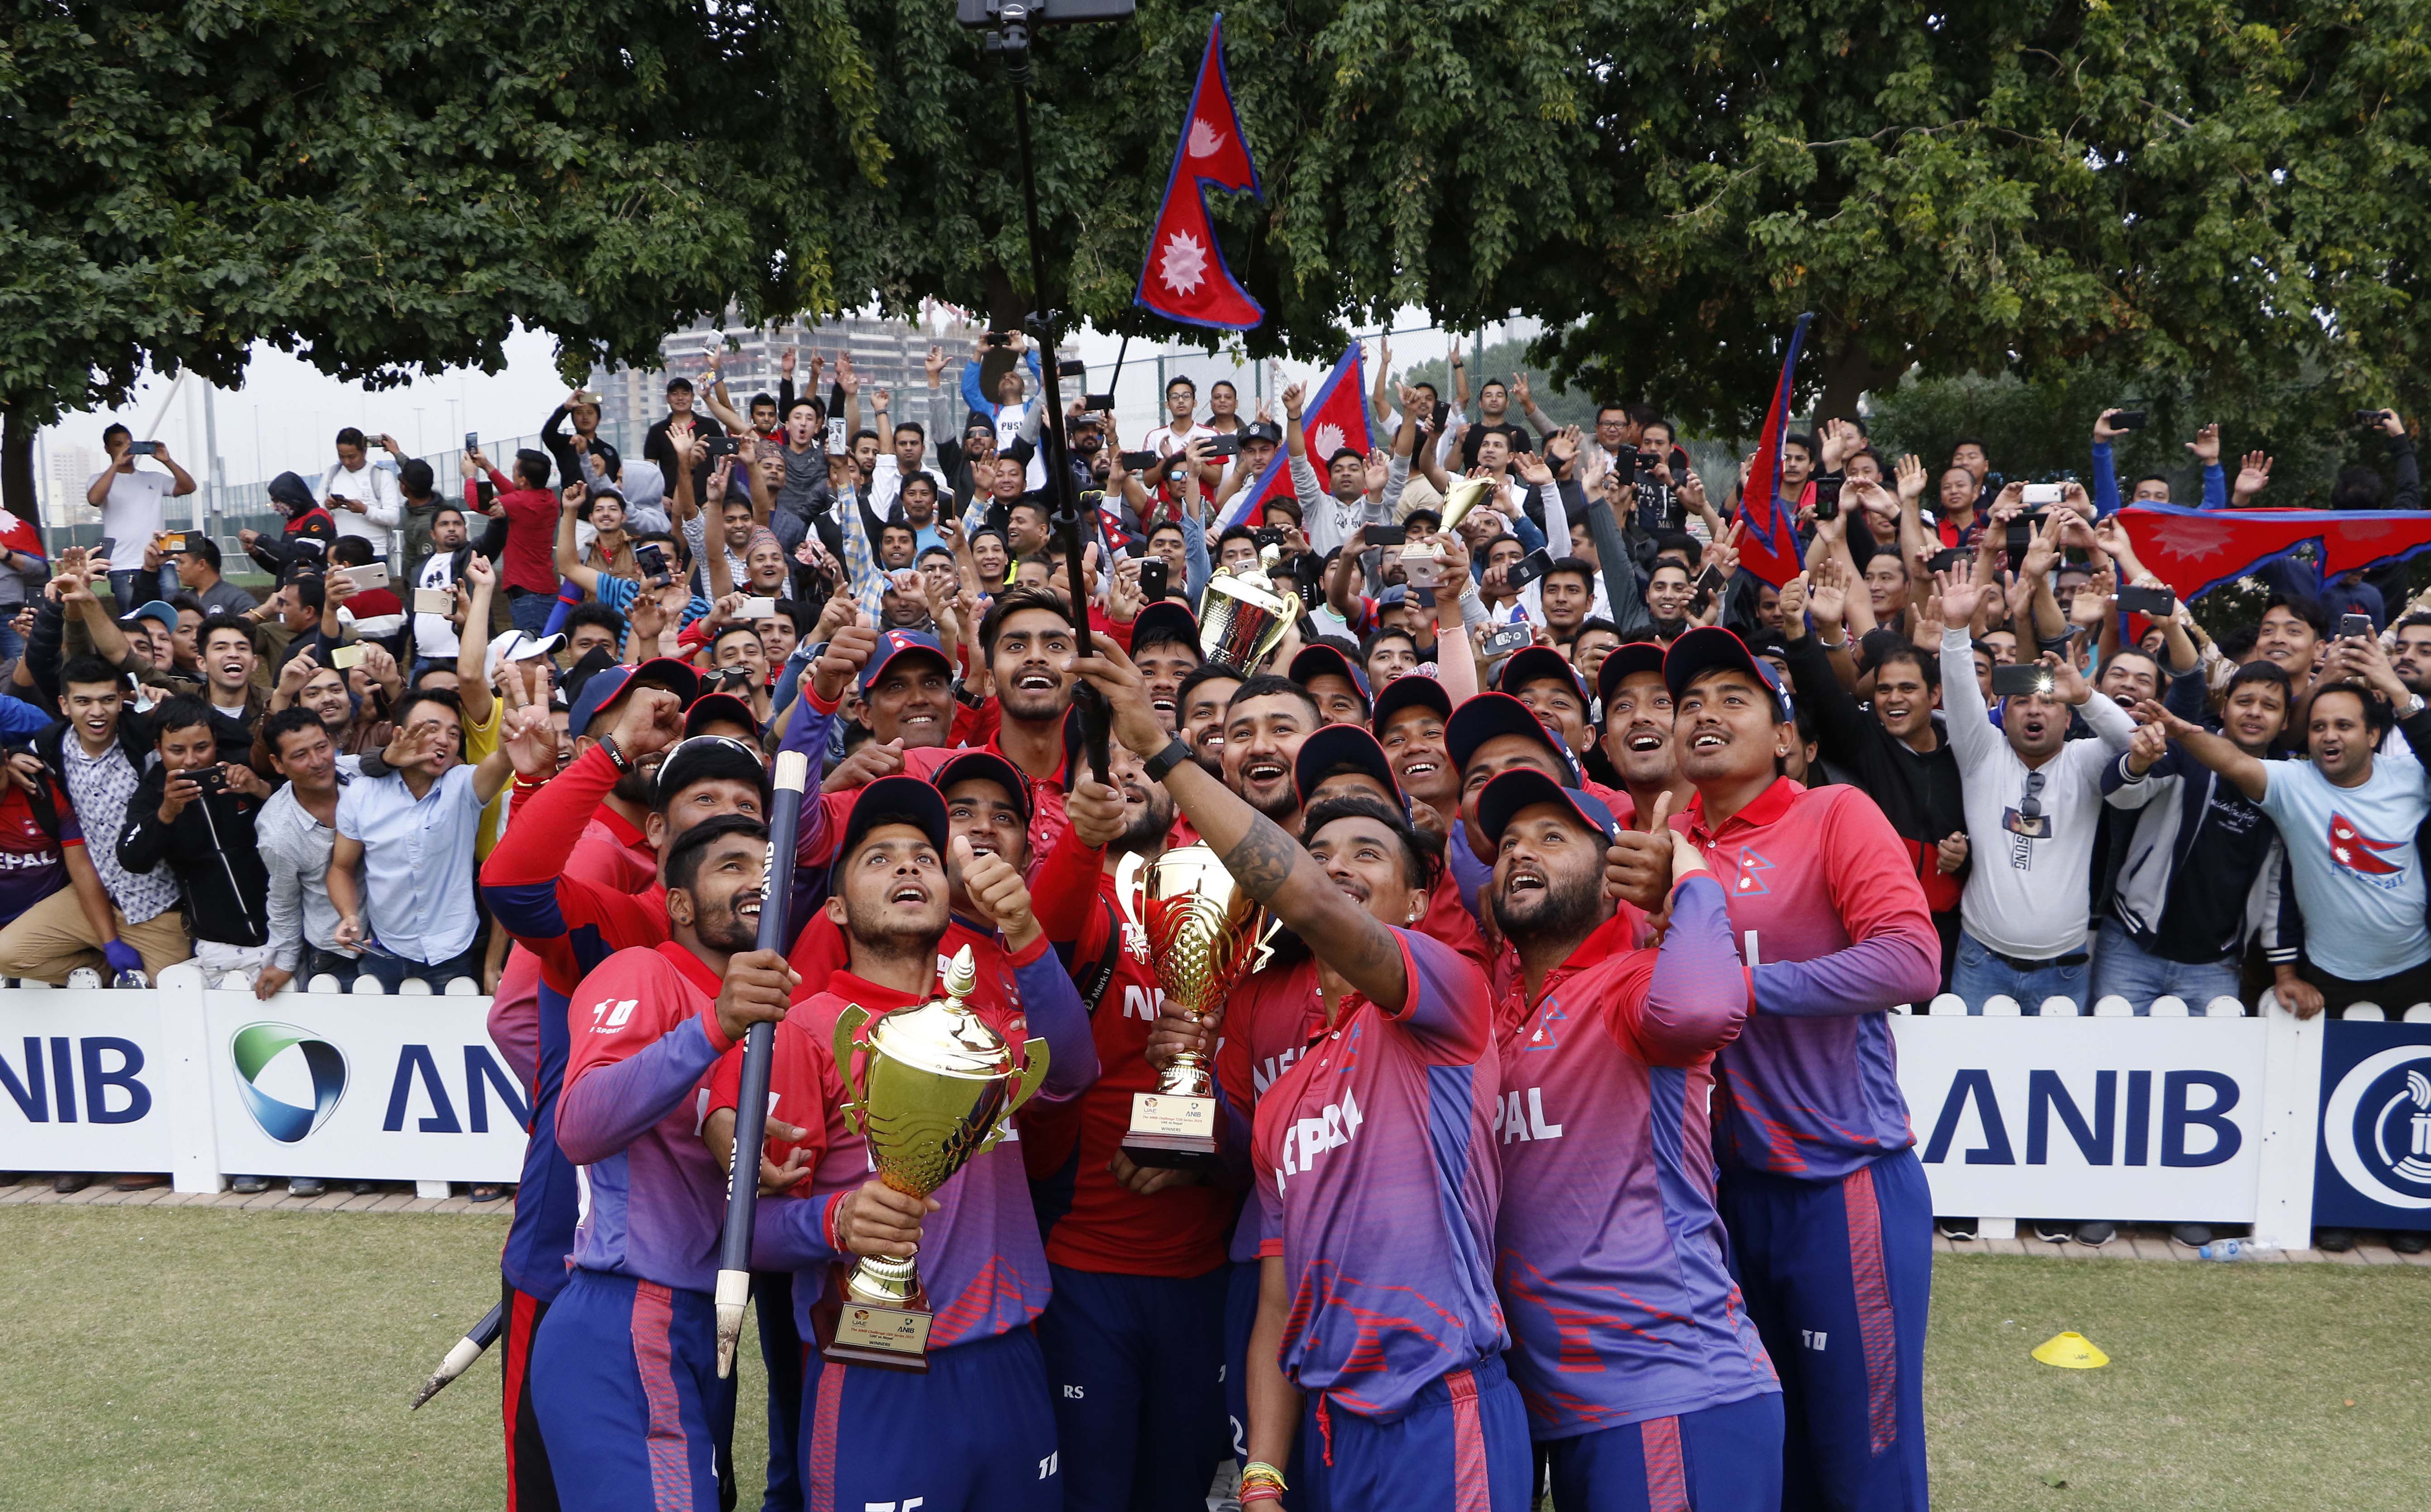 Nepali National Cricket Team pose with trophies and supporters after winning maiden ODI and T20I series against UAE at ICC Academy, Dubai on February 3, 2018. Photo: cricketingnepal.com